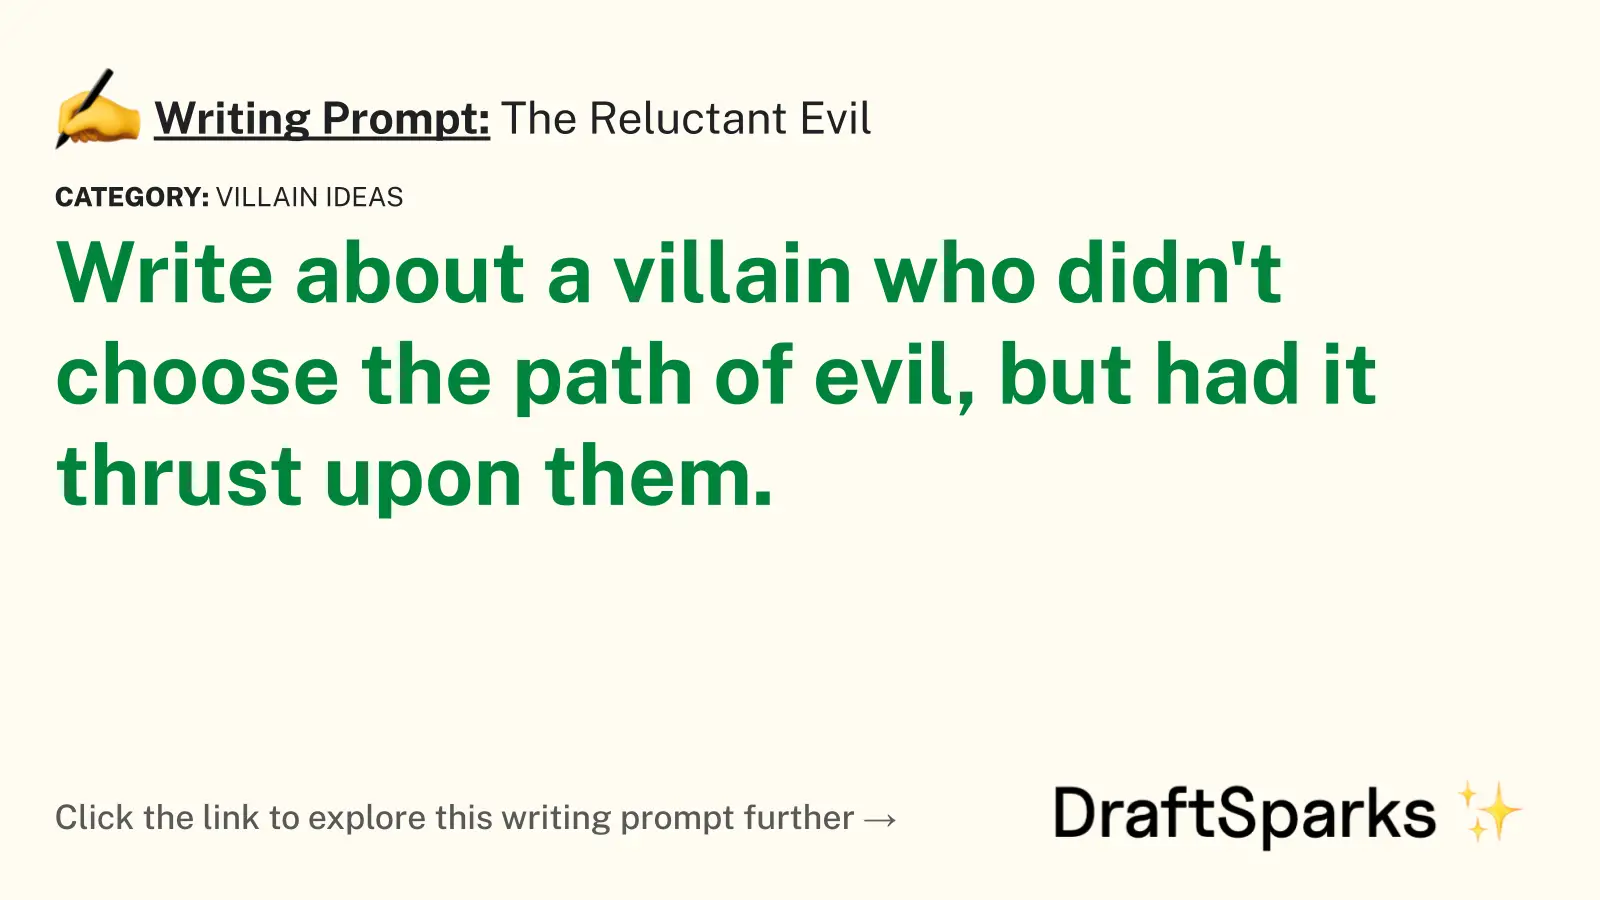 The Reluctant Evil